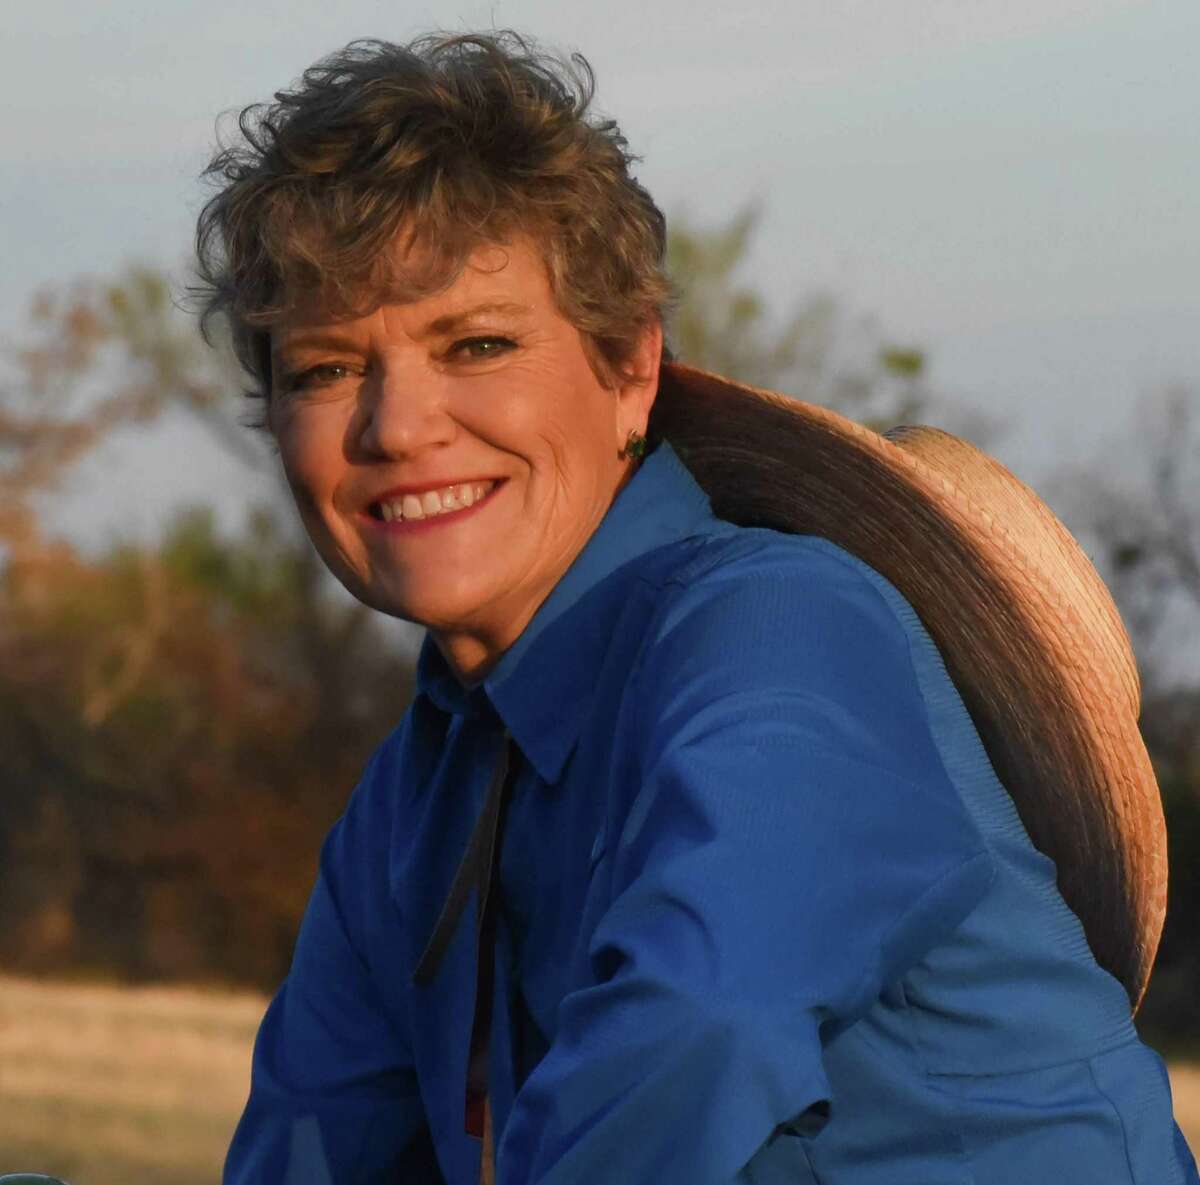 Kim Olson, (D), candidate for Agriculture Commissioner.